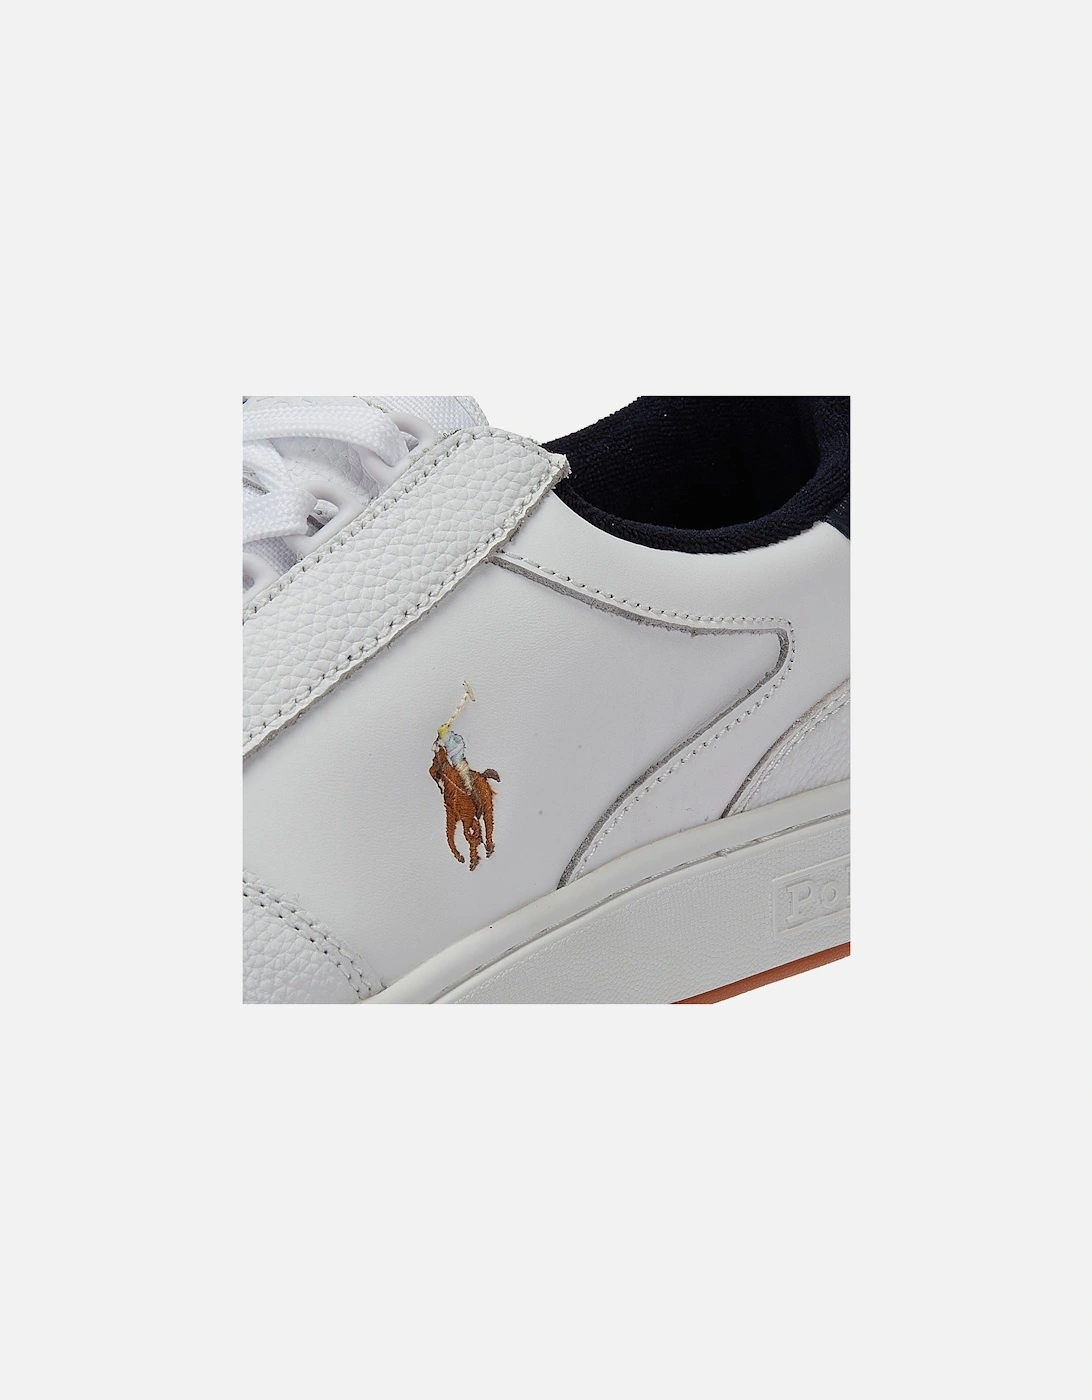 Polo Court Leather Mens White/Navy Trainers